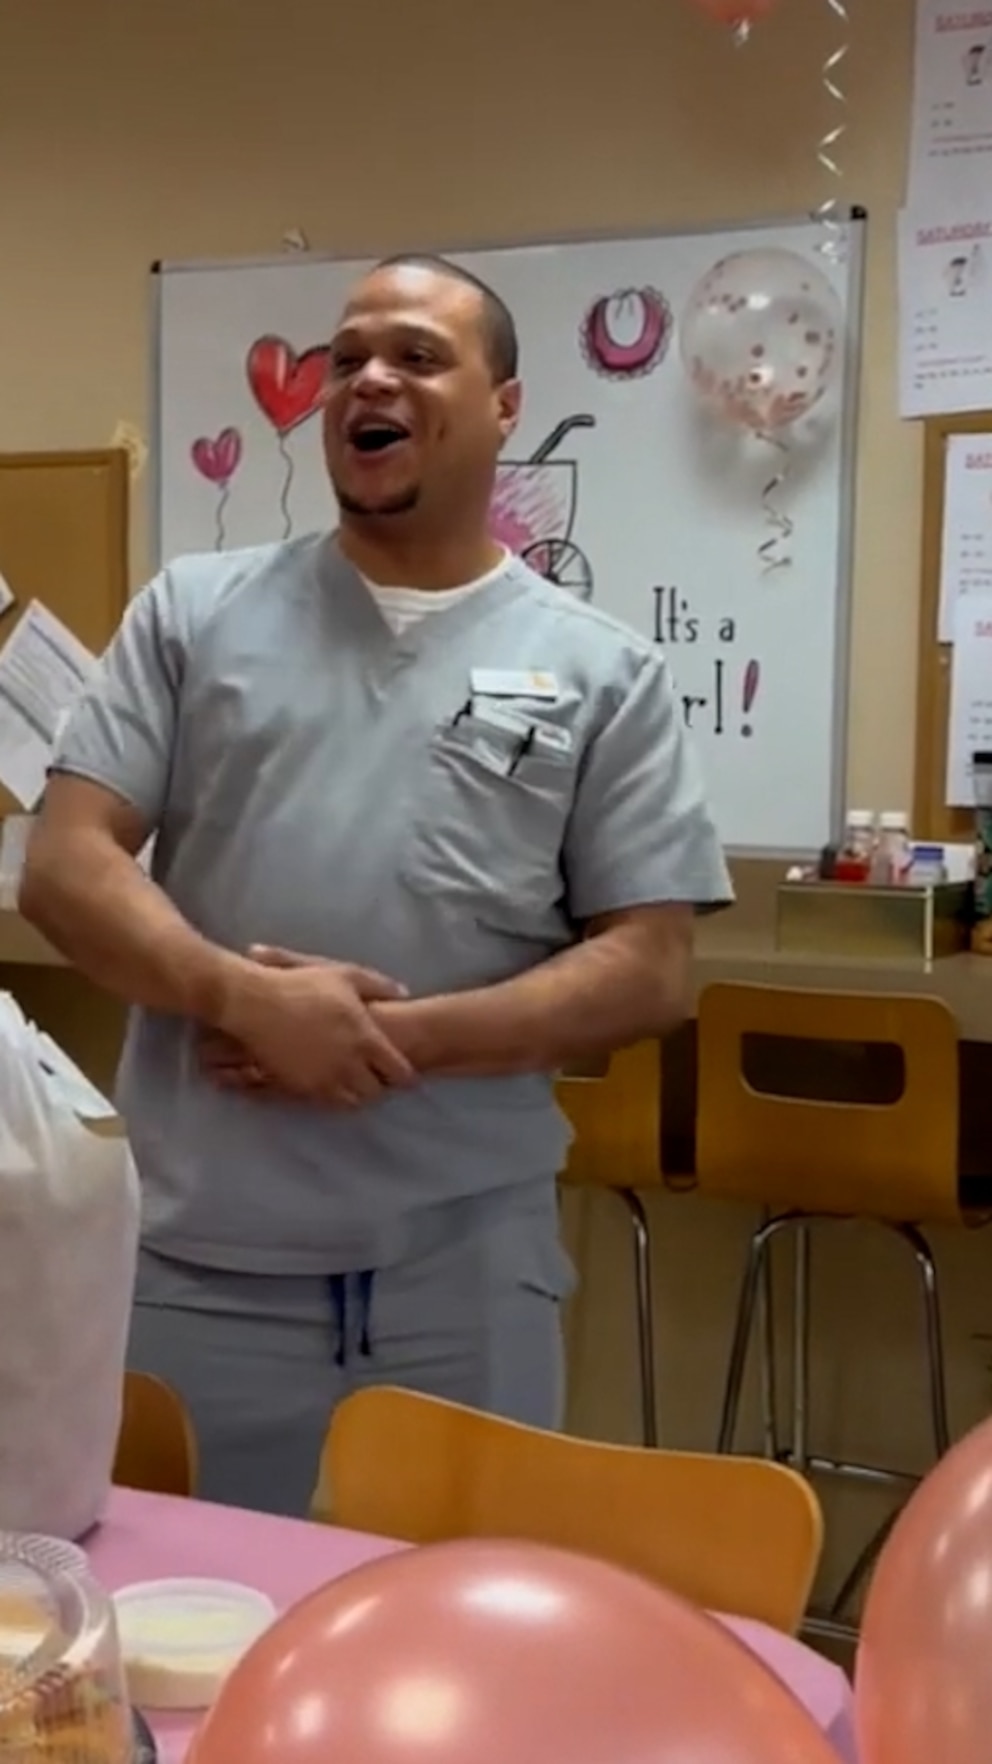 Colleagues Surprise Video Dad-to-be with Heartwarming Baby Shower